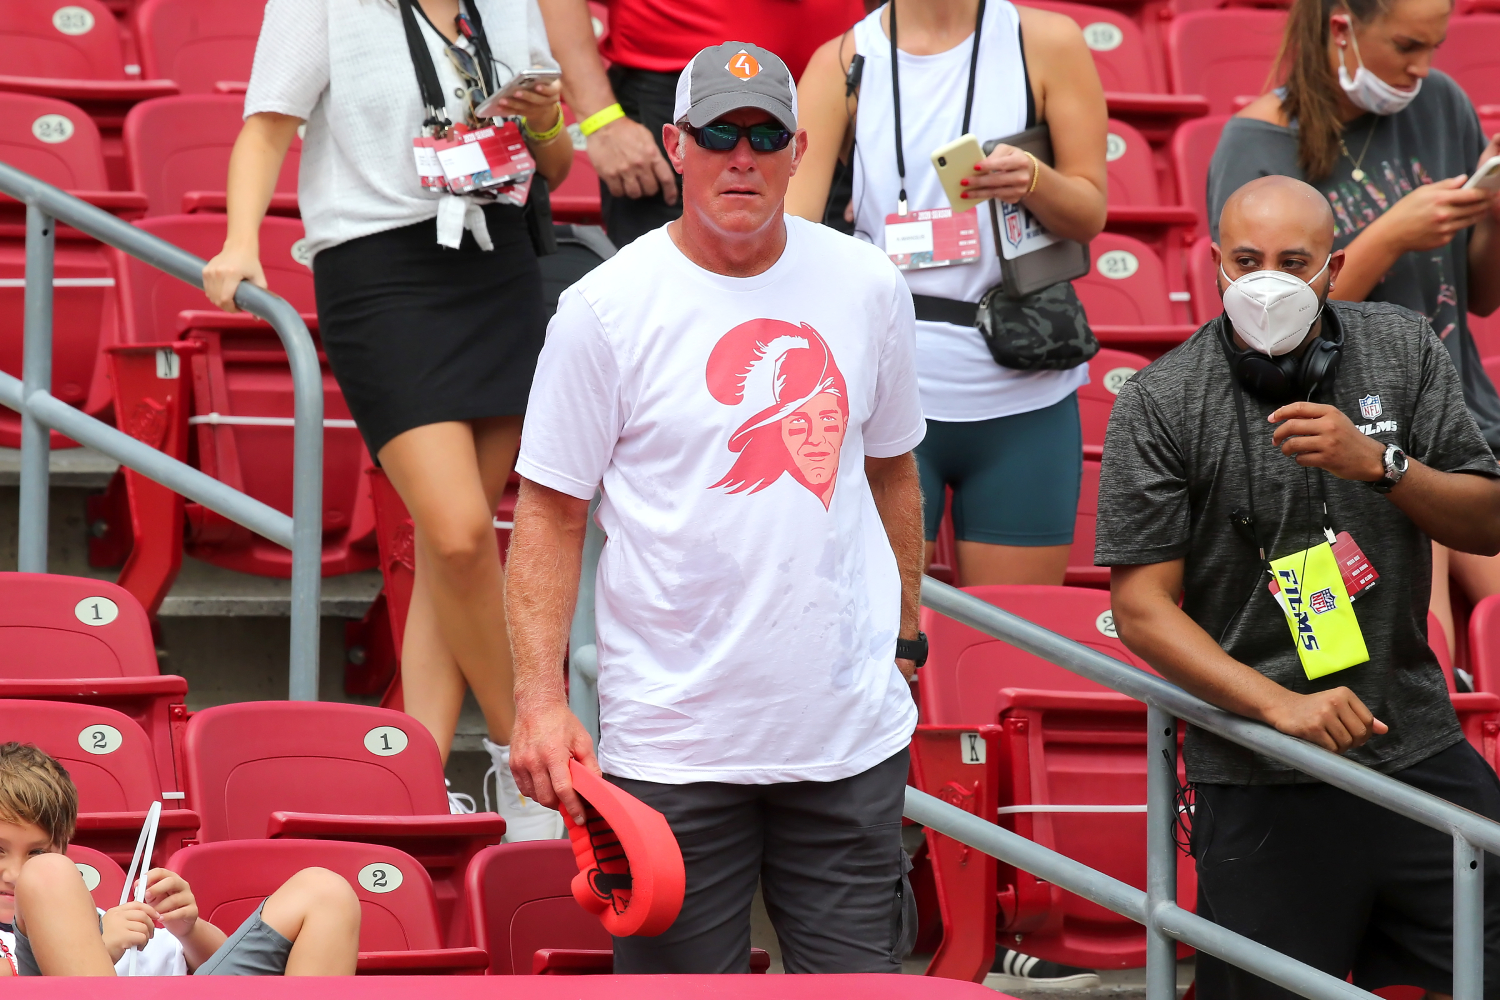 Why Was Brett Favre at the Tampa Bay Buccaneers Game Wearing a Tom Brady Shirt?